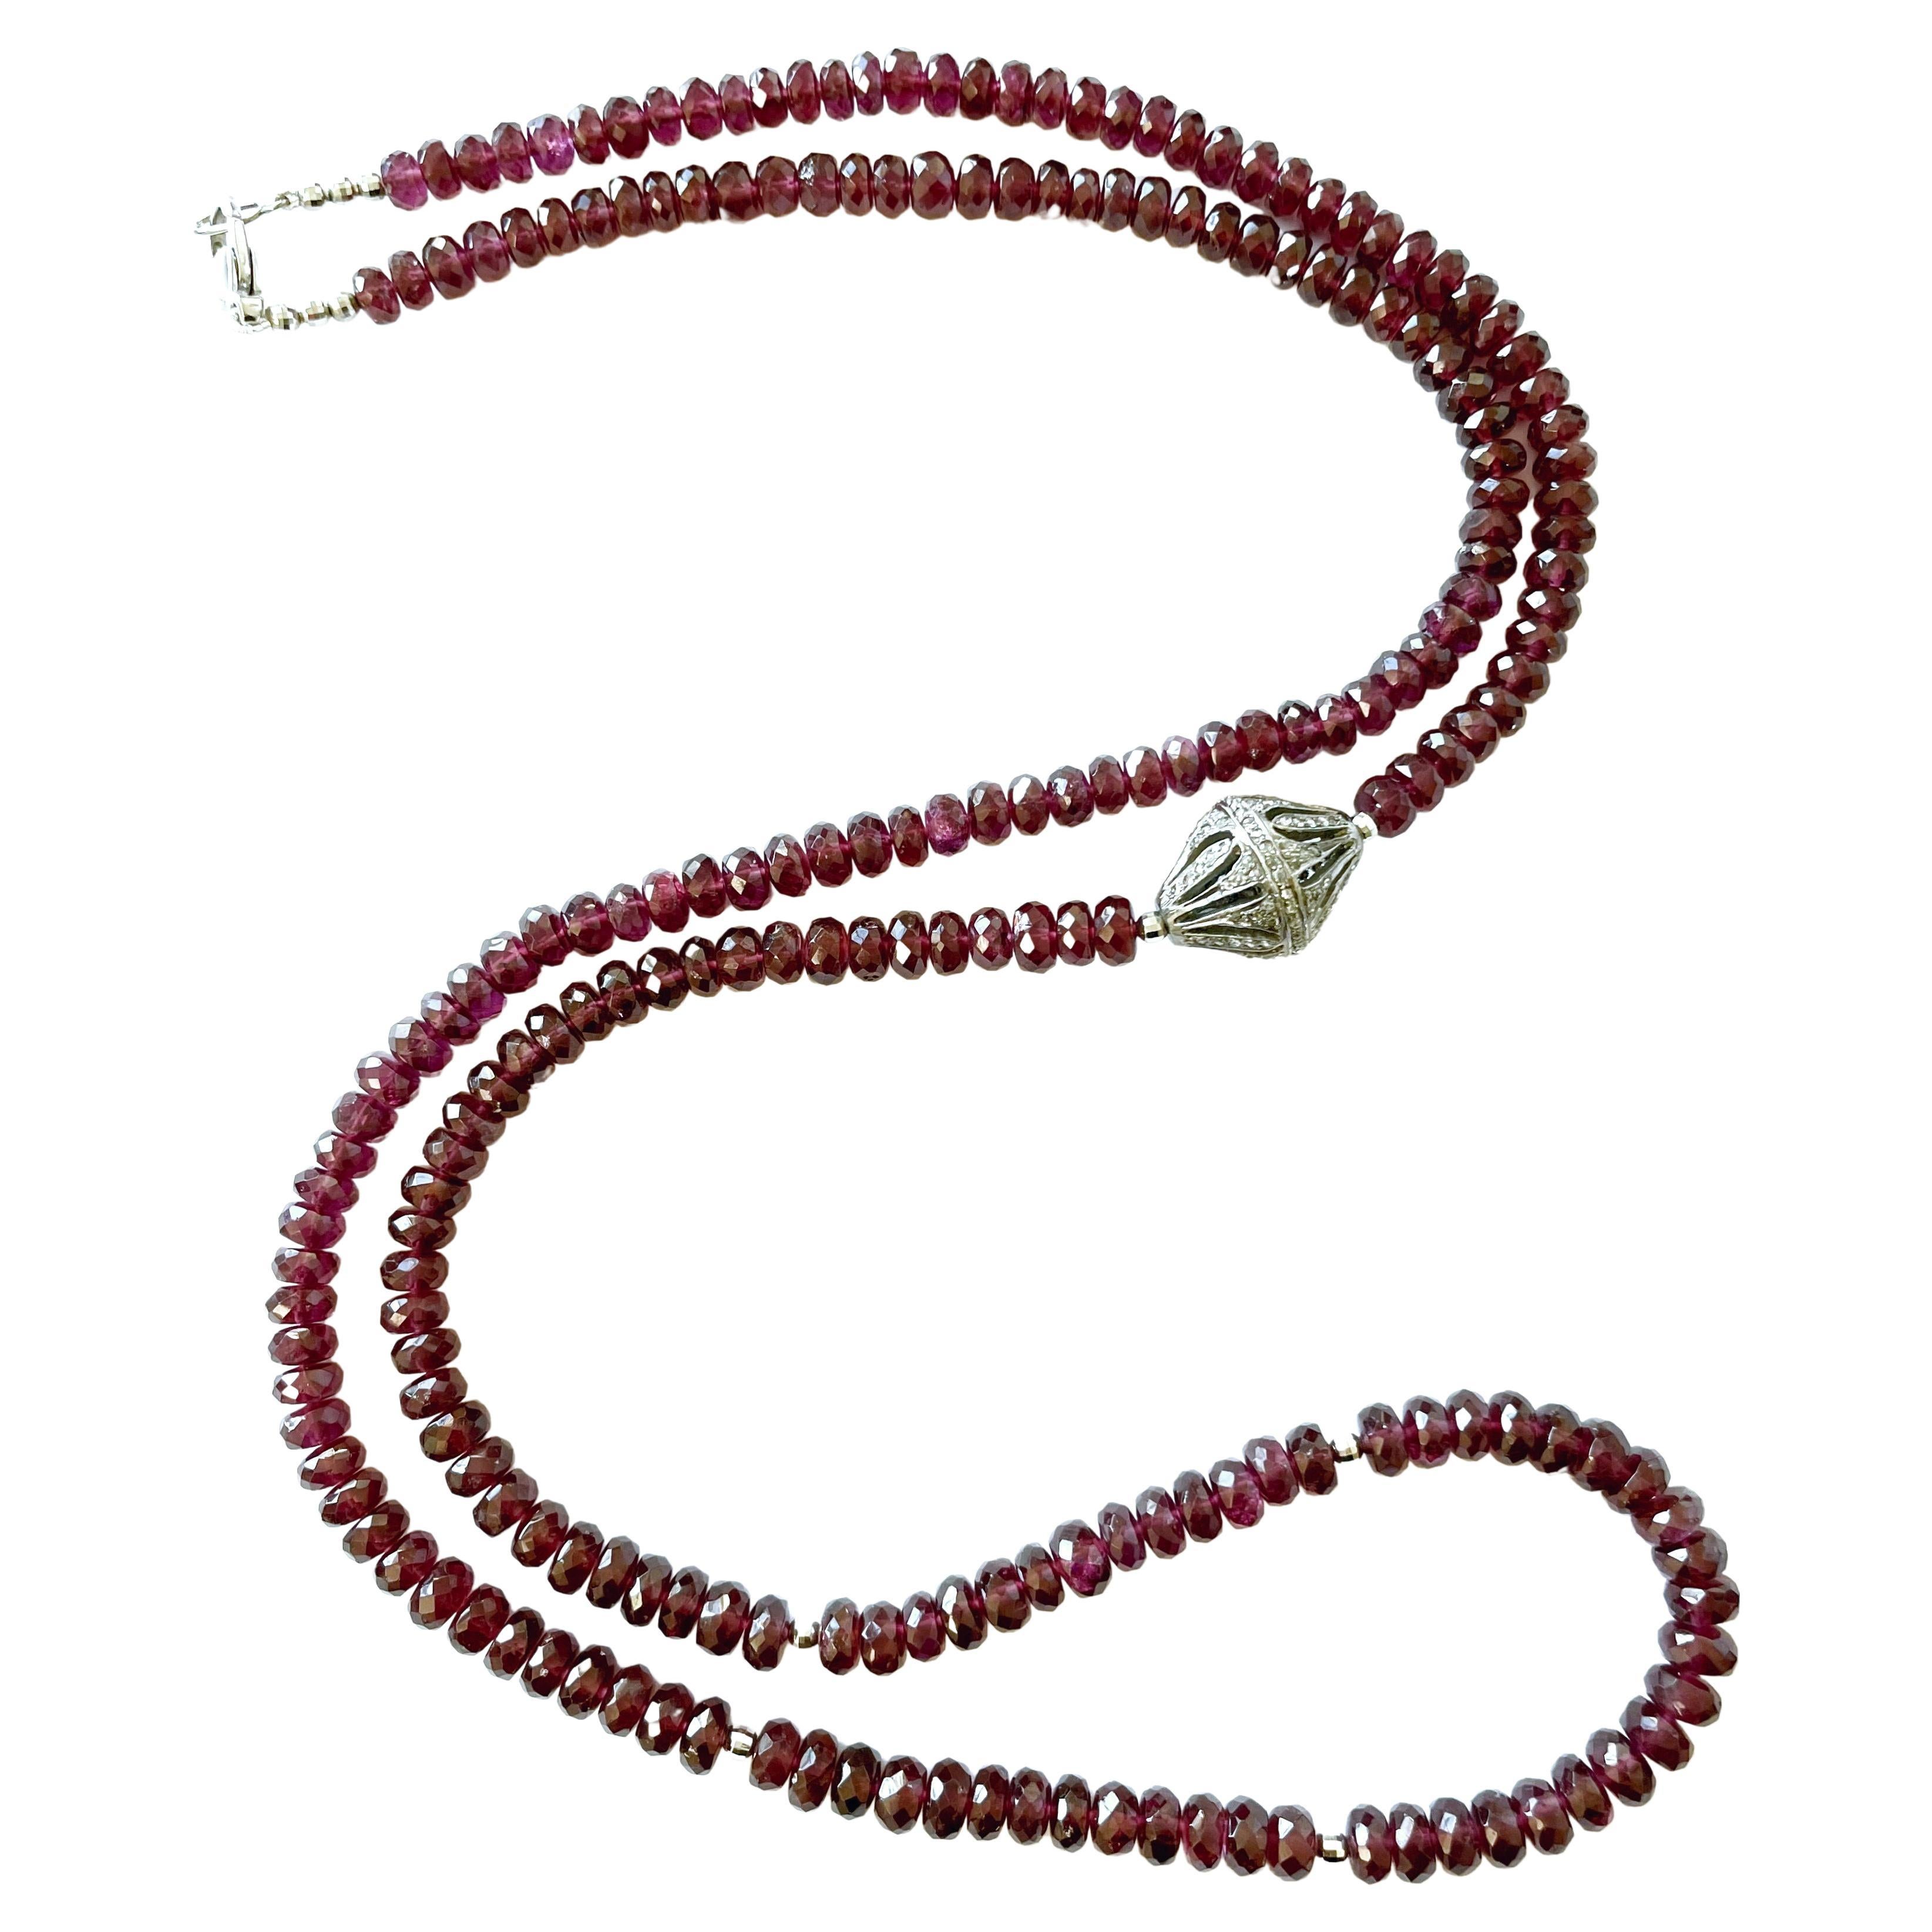 373 Carats Rhodolite Garnet with Large Pave Diamond Bead Necklace For Sale